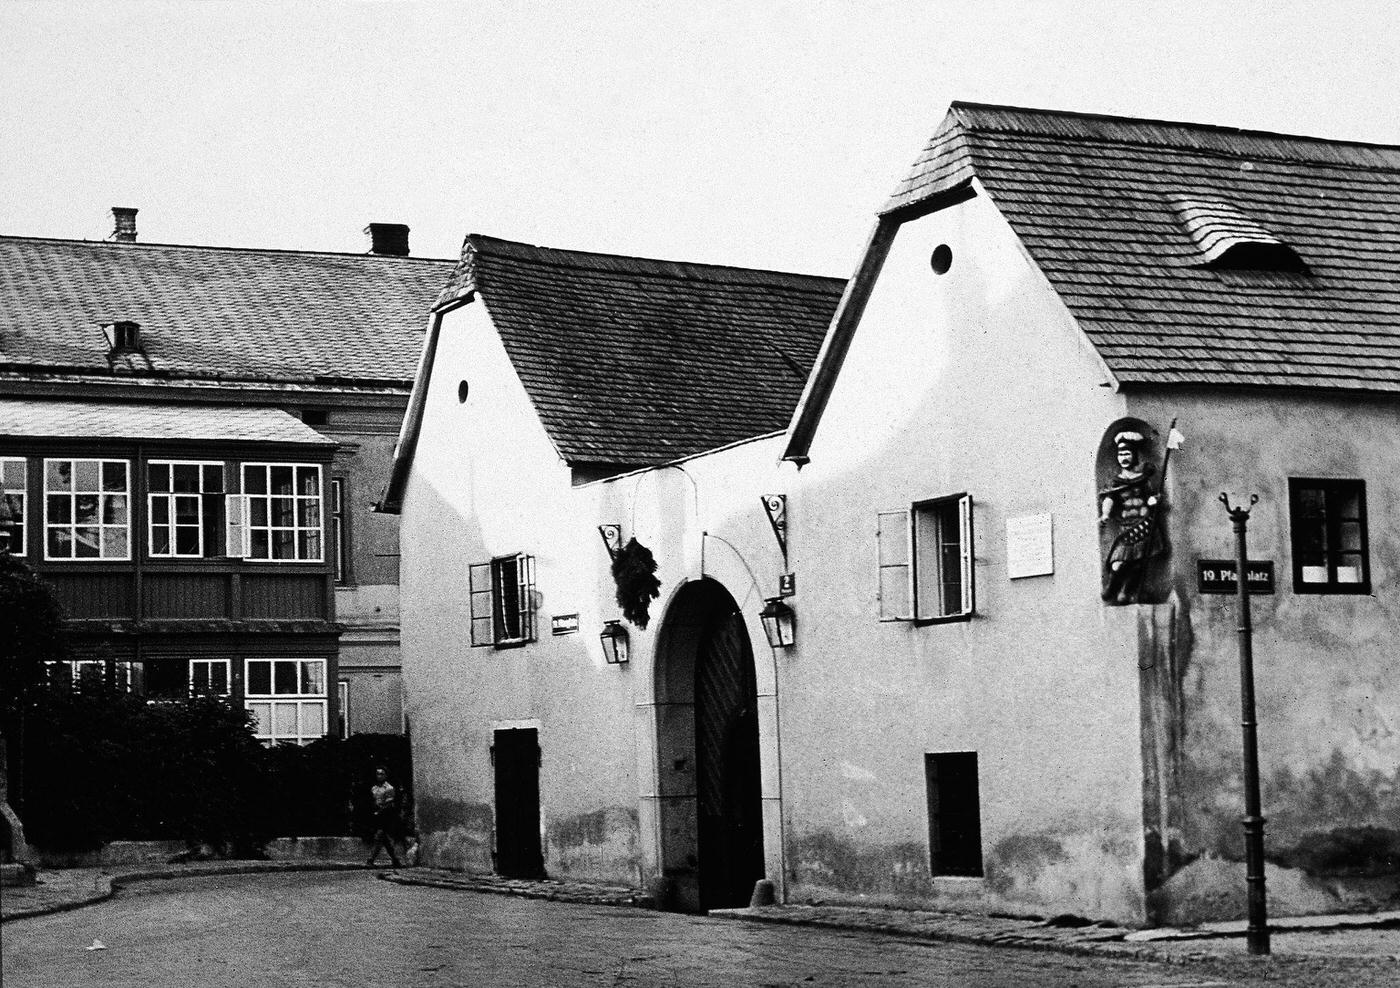 Exterior view of the home of Ludwig van Beethoven in Heiligenstadt, Austria, where he wrote his will, known as the "Heiligenstadt Testament," in mid-1900s.